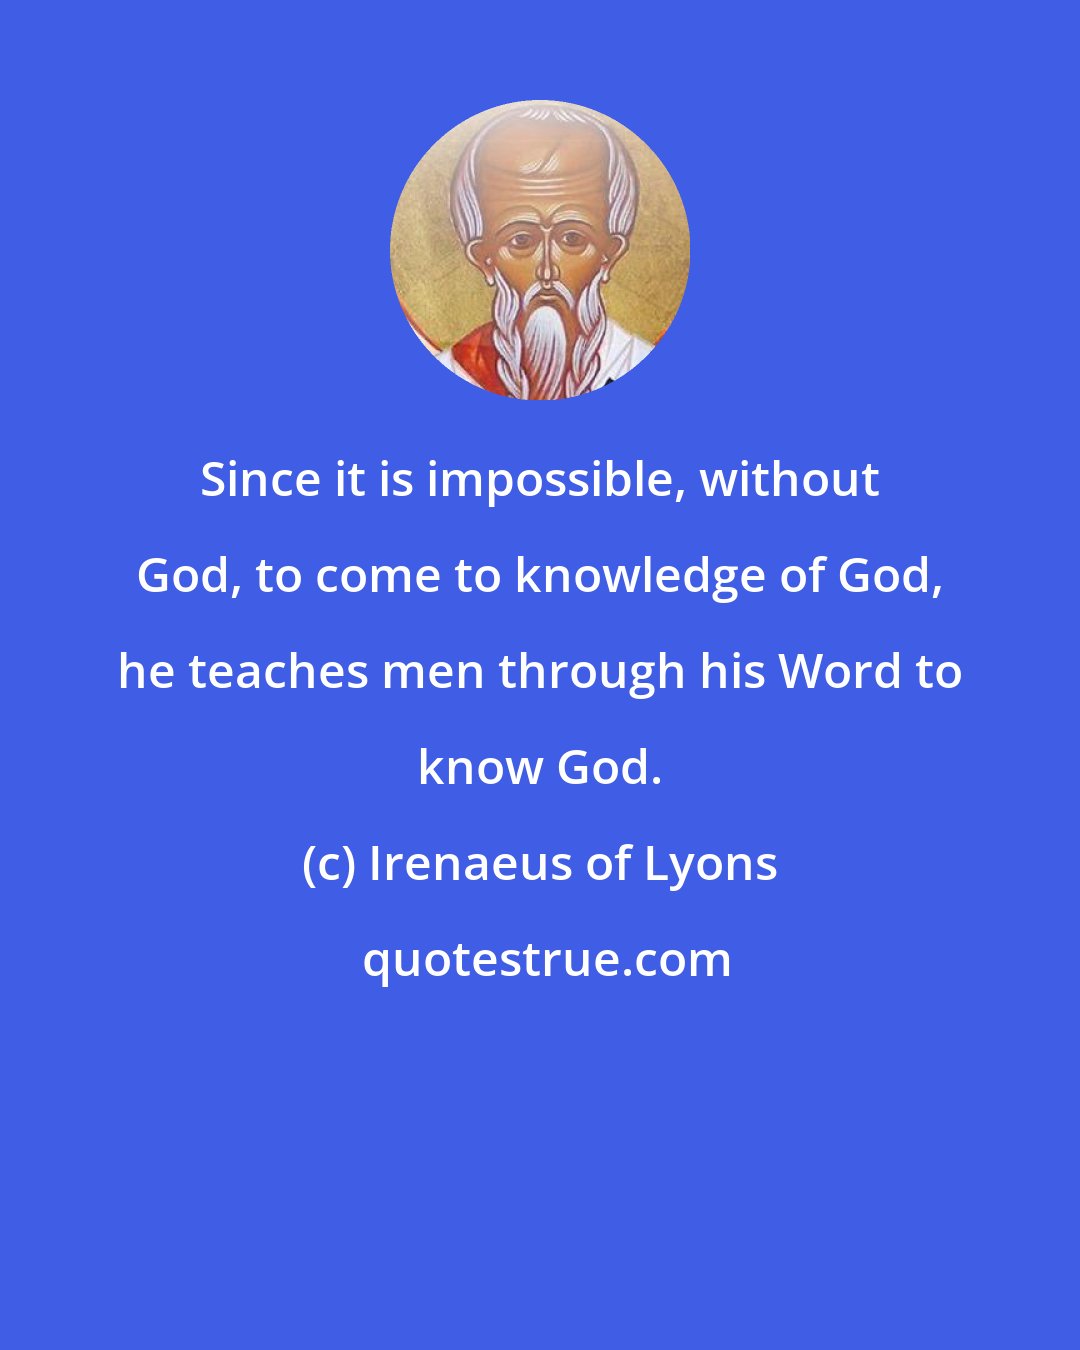 Irenaeus of Lyons: Since it is impossible, without God, to come to knowledge of God, he teaches men through his Word to know God.